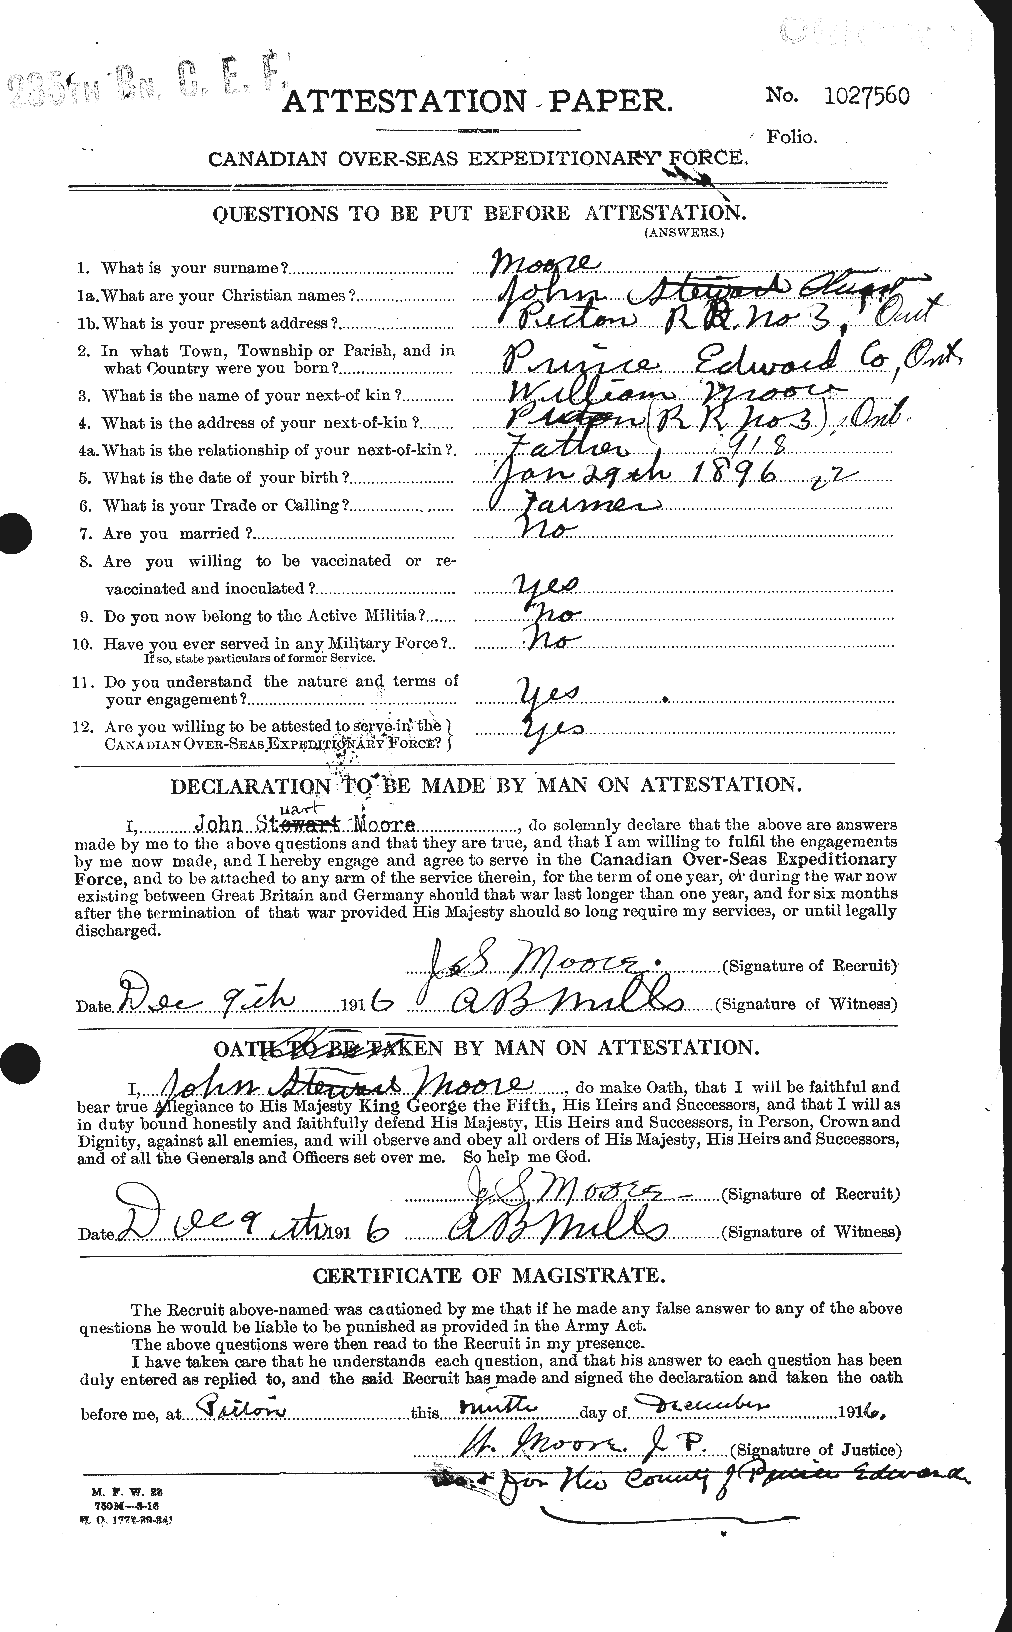 Personnel Records of the First World War - CEF 503335a